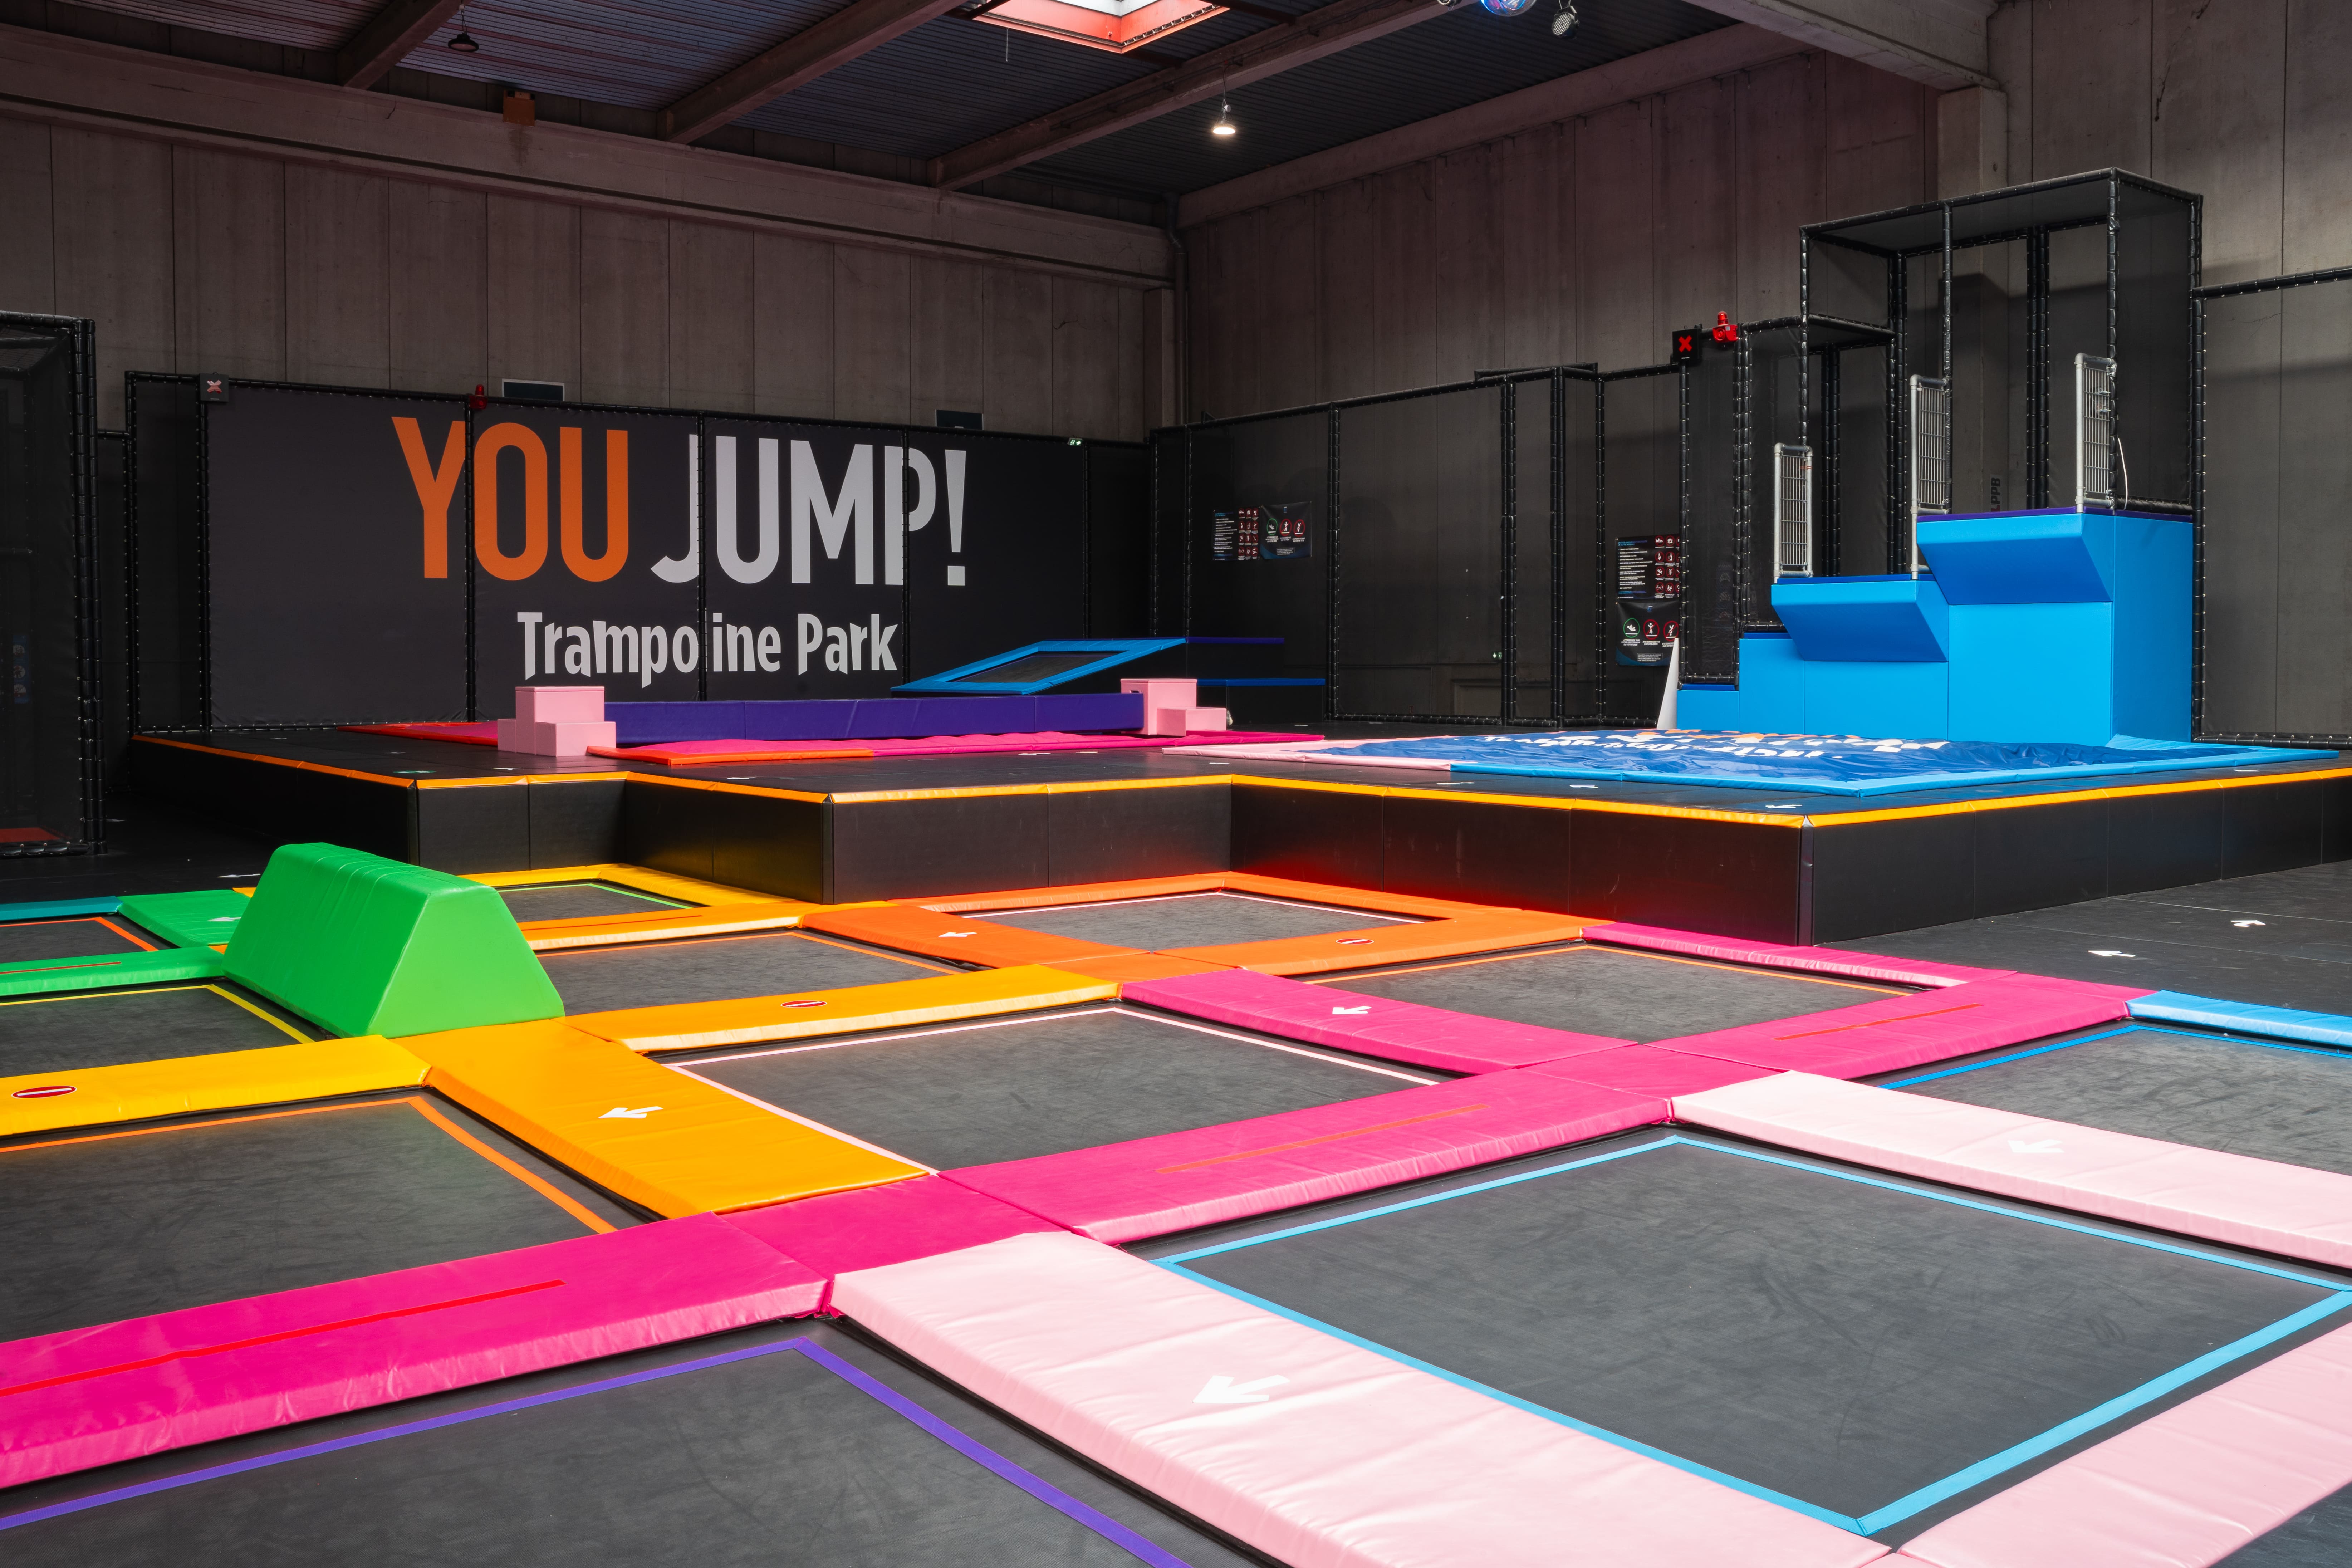 Come jump with your family!